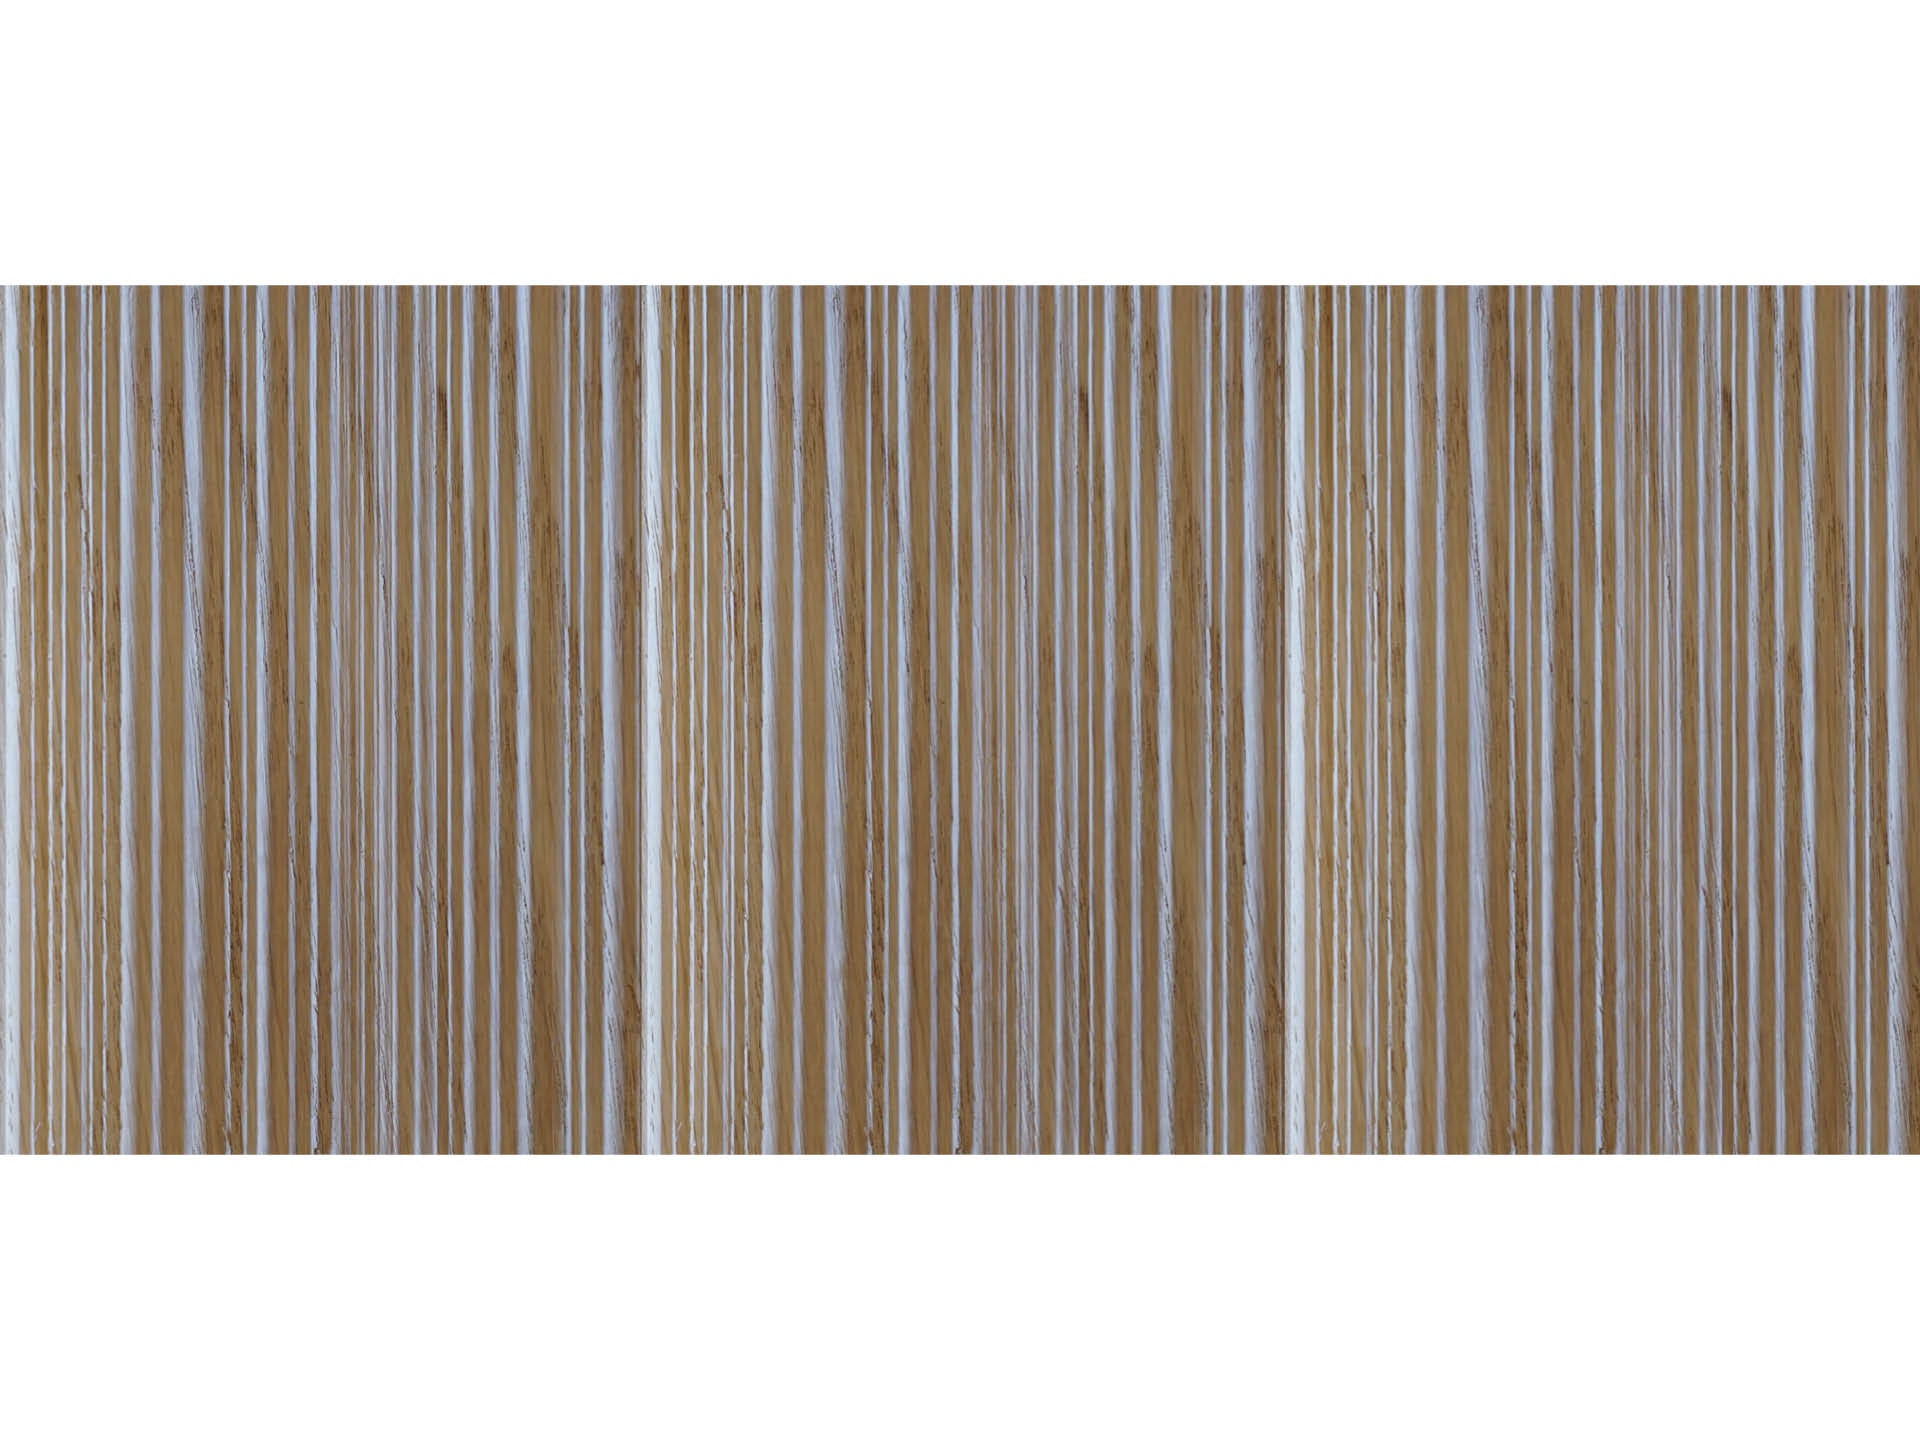 Side by side of Weldtex tongue & groove white oak hardwood plank consisting of a combed, striated, brushed wood appearance common in mid-century modern homes and design